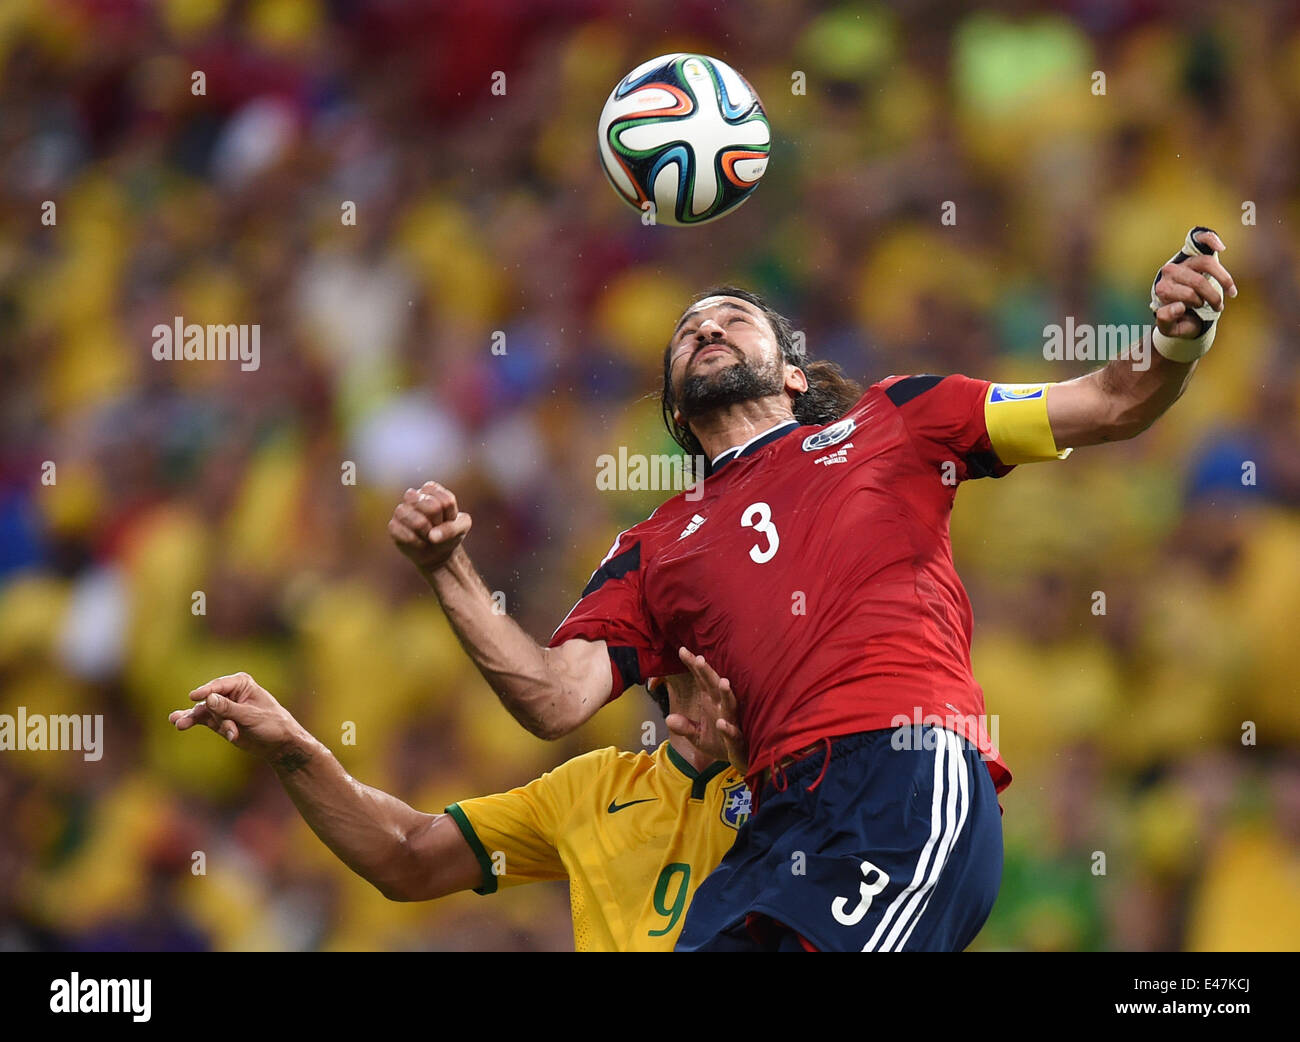 Fortaleza, Brazil. 04th July, 2014. Fred (L) of Brazil and Mario Yepes of Colombia vie for the ball during the FIFA World Cup 2014 quarter final match soccer between Brazil and Colombia at the Estadio Castelao in Fortaleza, Brazil, 04 July 2014. Photo: Marius Becker/dpa/Alamy Live News Stock Photo